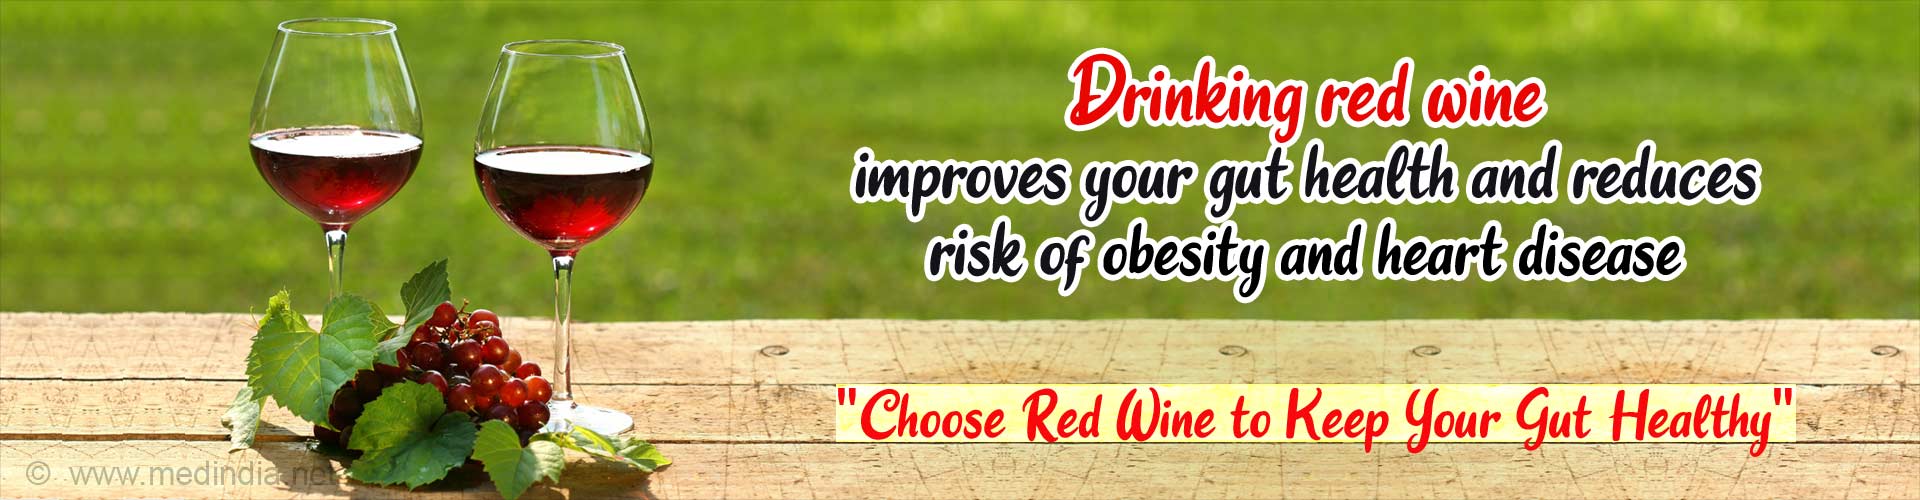 Drinking red wine improves your gut health and reduces risk of obesity and heart disease. Choose red wine to keep your gut healthy.